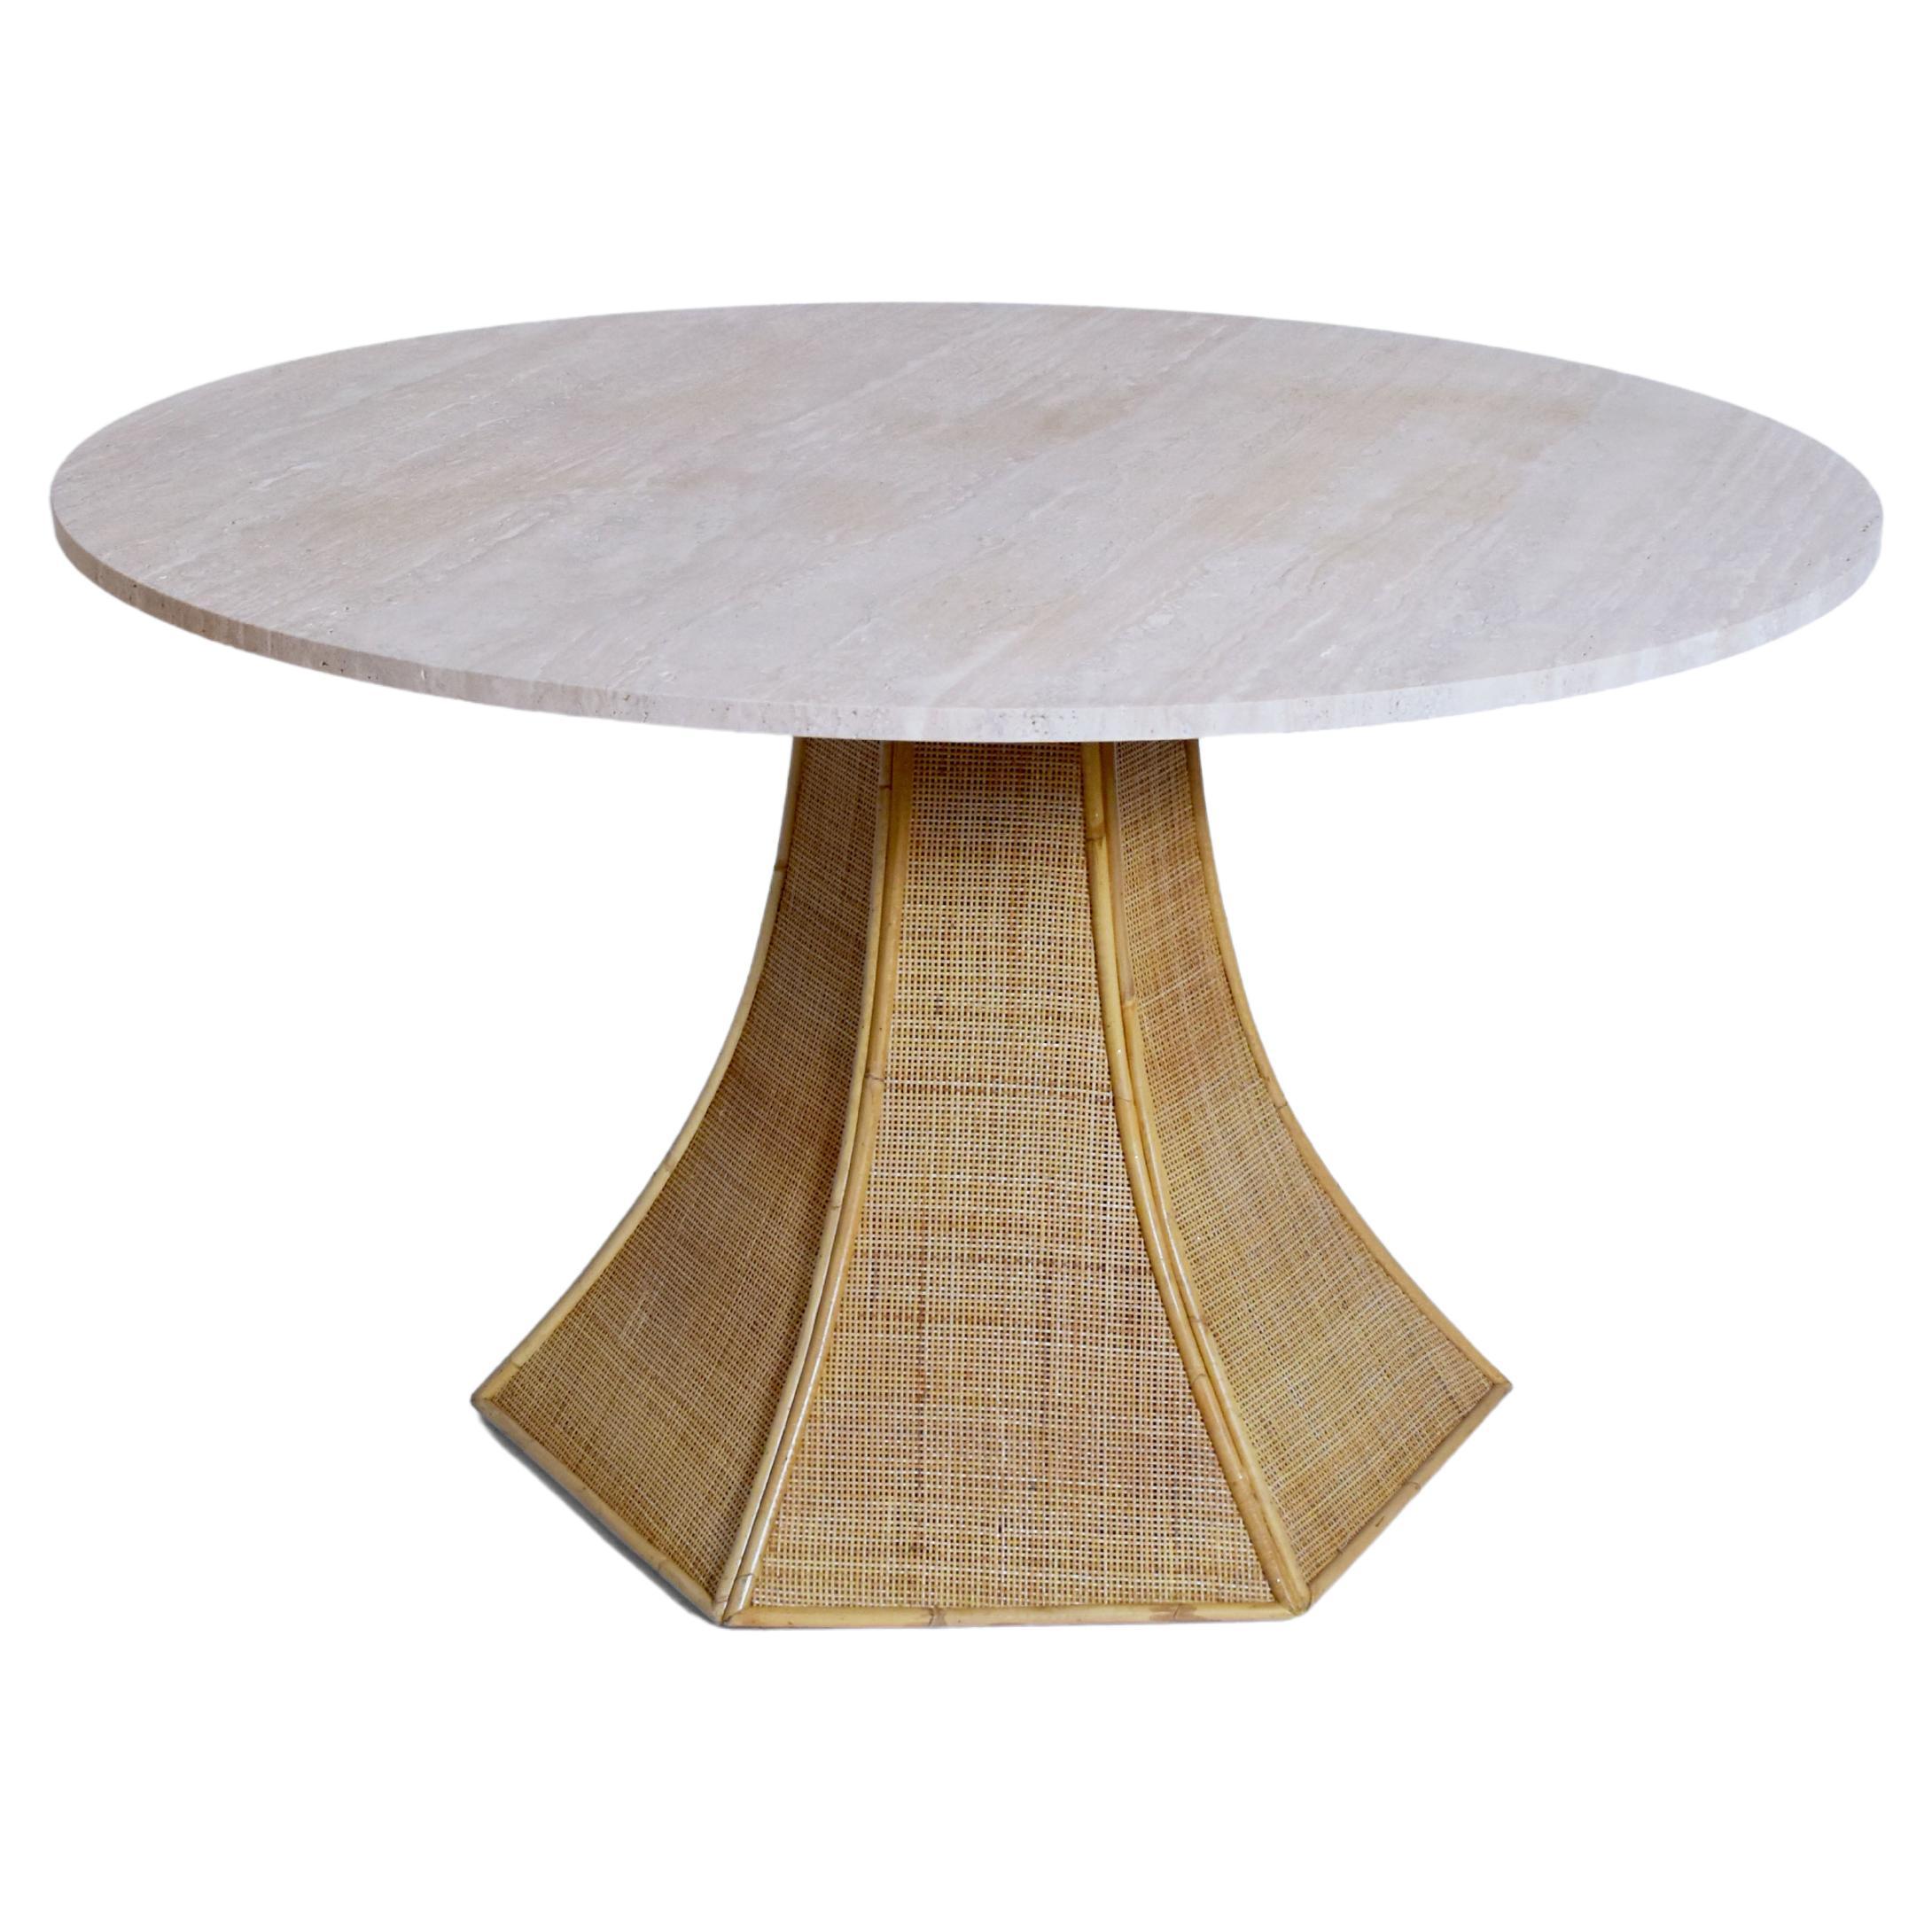 "Caprarola" Rattan and Travertine Dining Table, Barracuda Edition For Sale